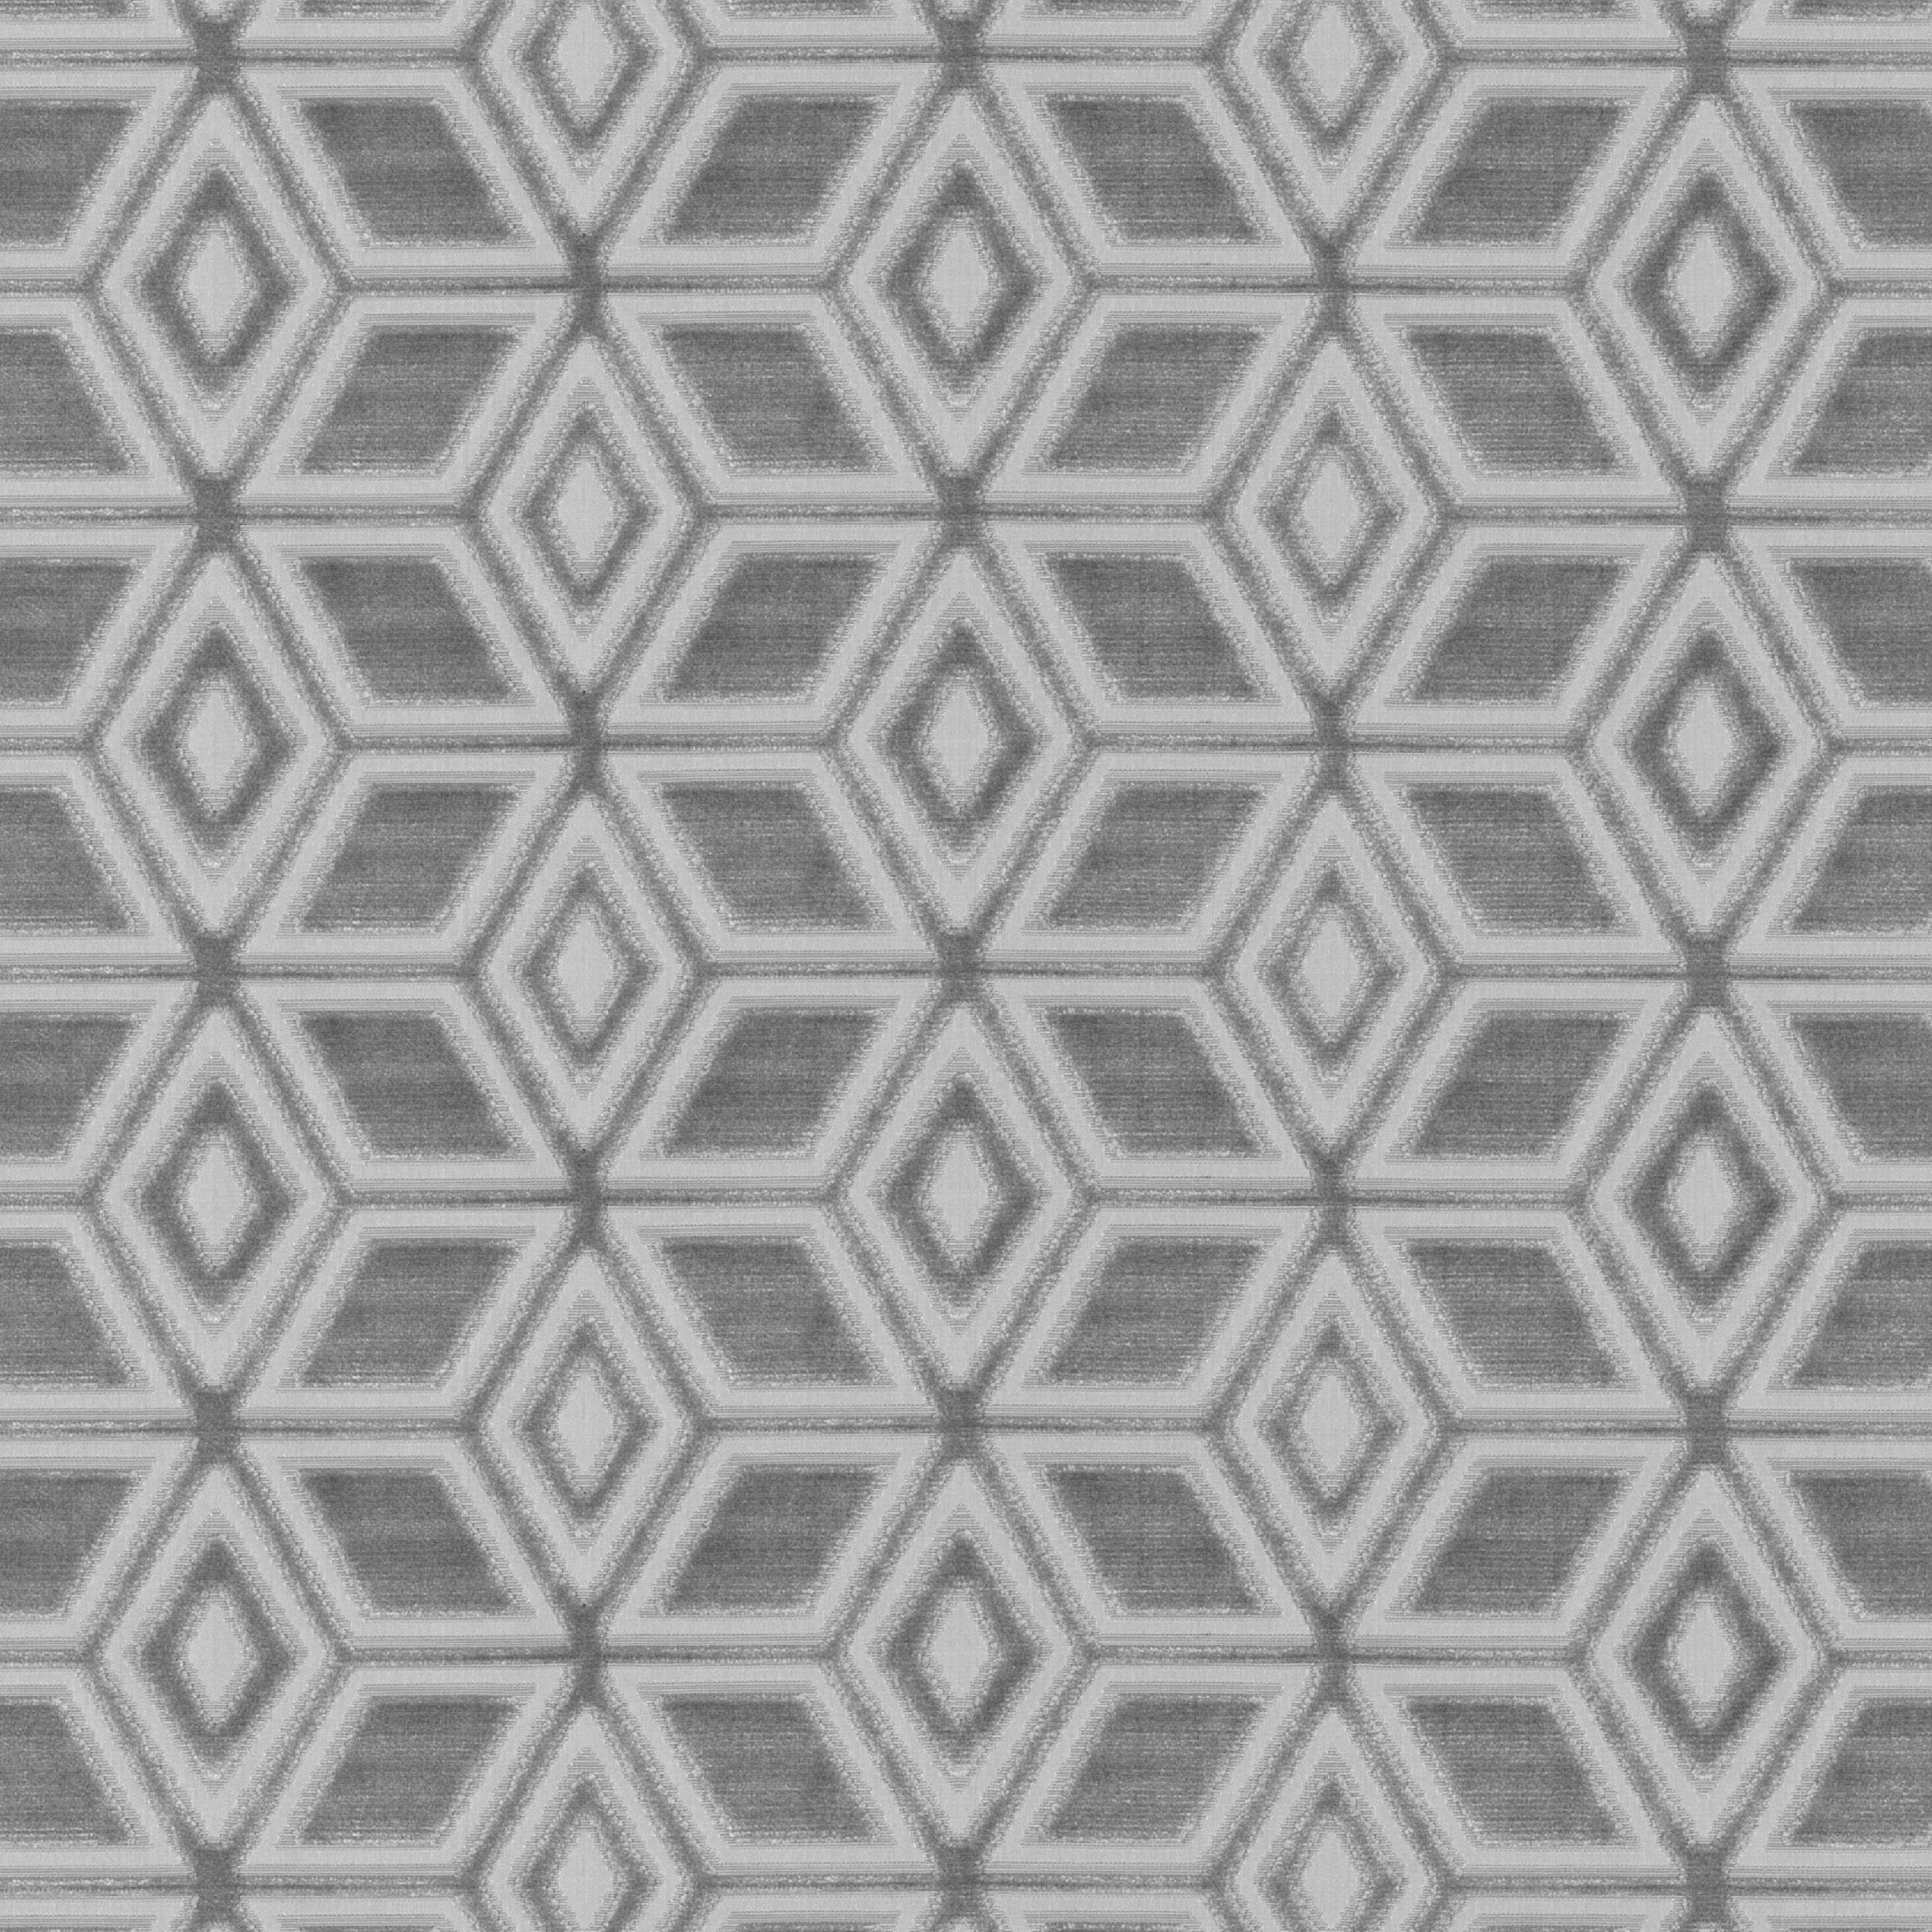 Jardin Maze fabric in grey color - pattern number AW72989 - by Anna French in the Manor collection